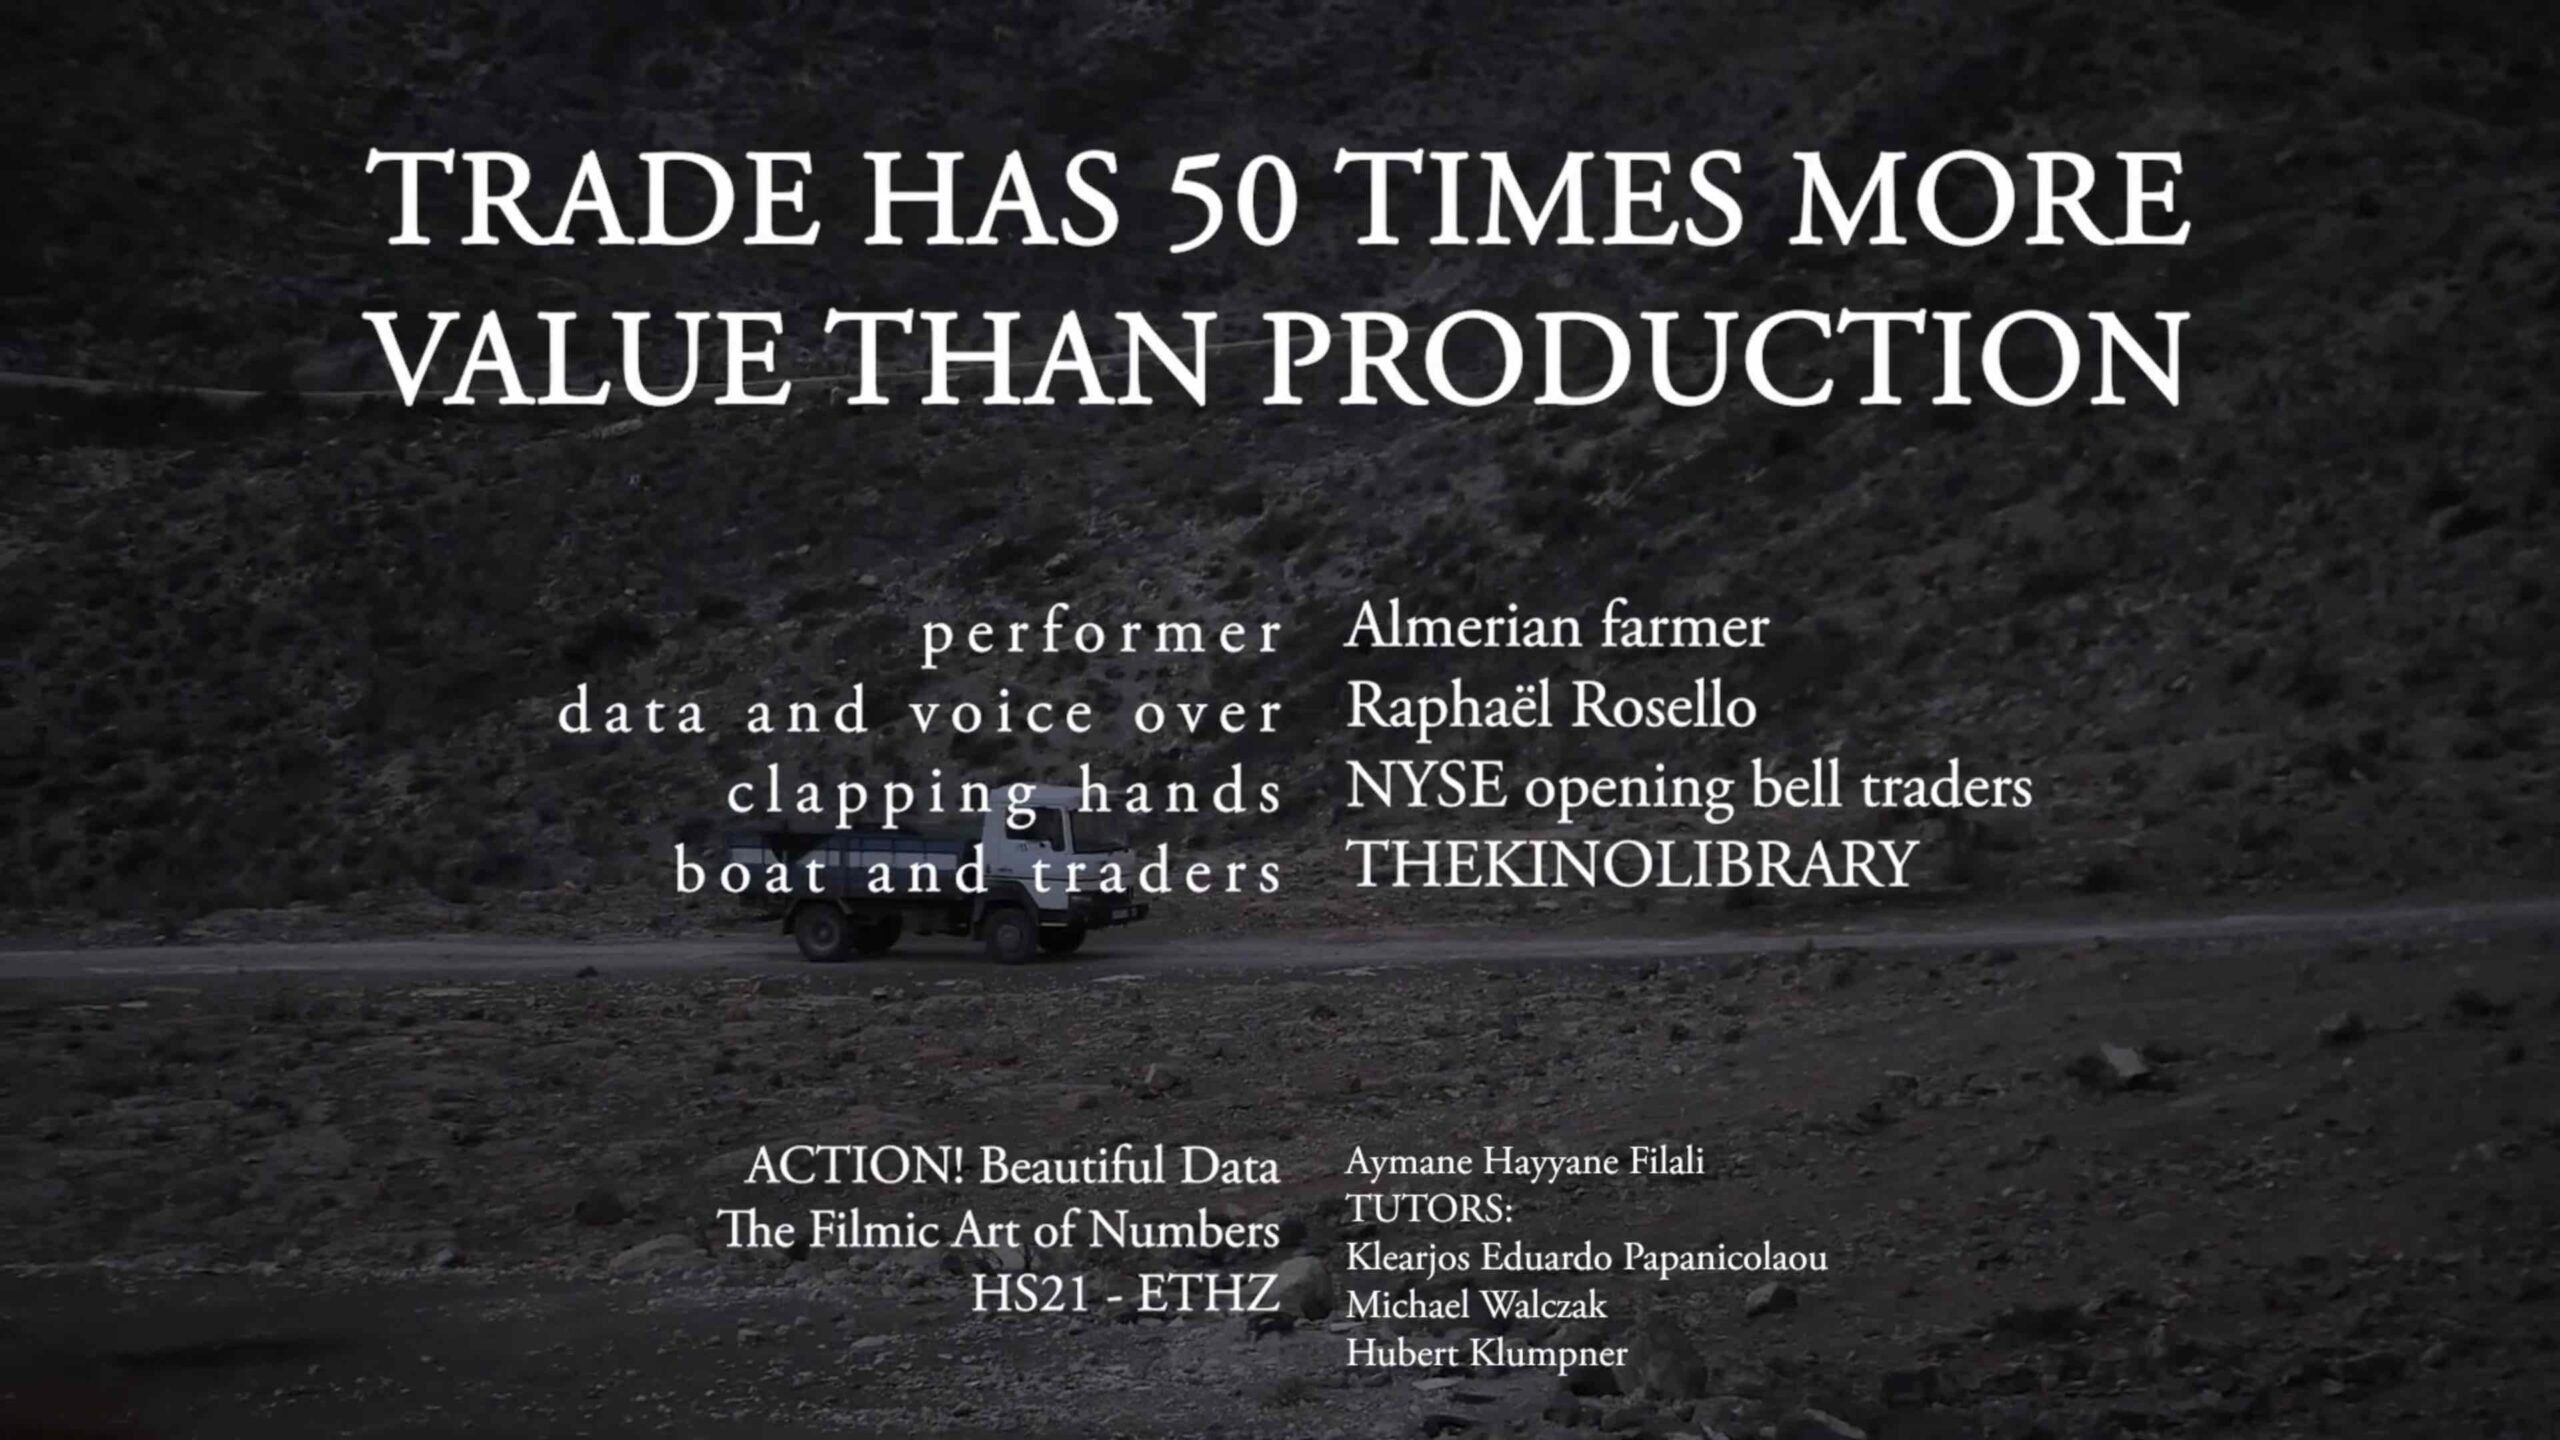 Trade Has 50 Times More Value Than Production